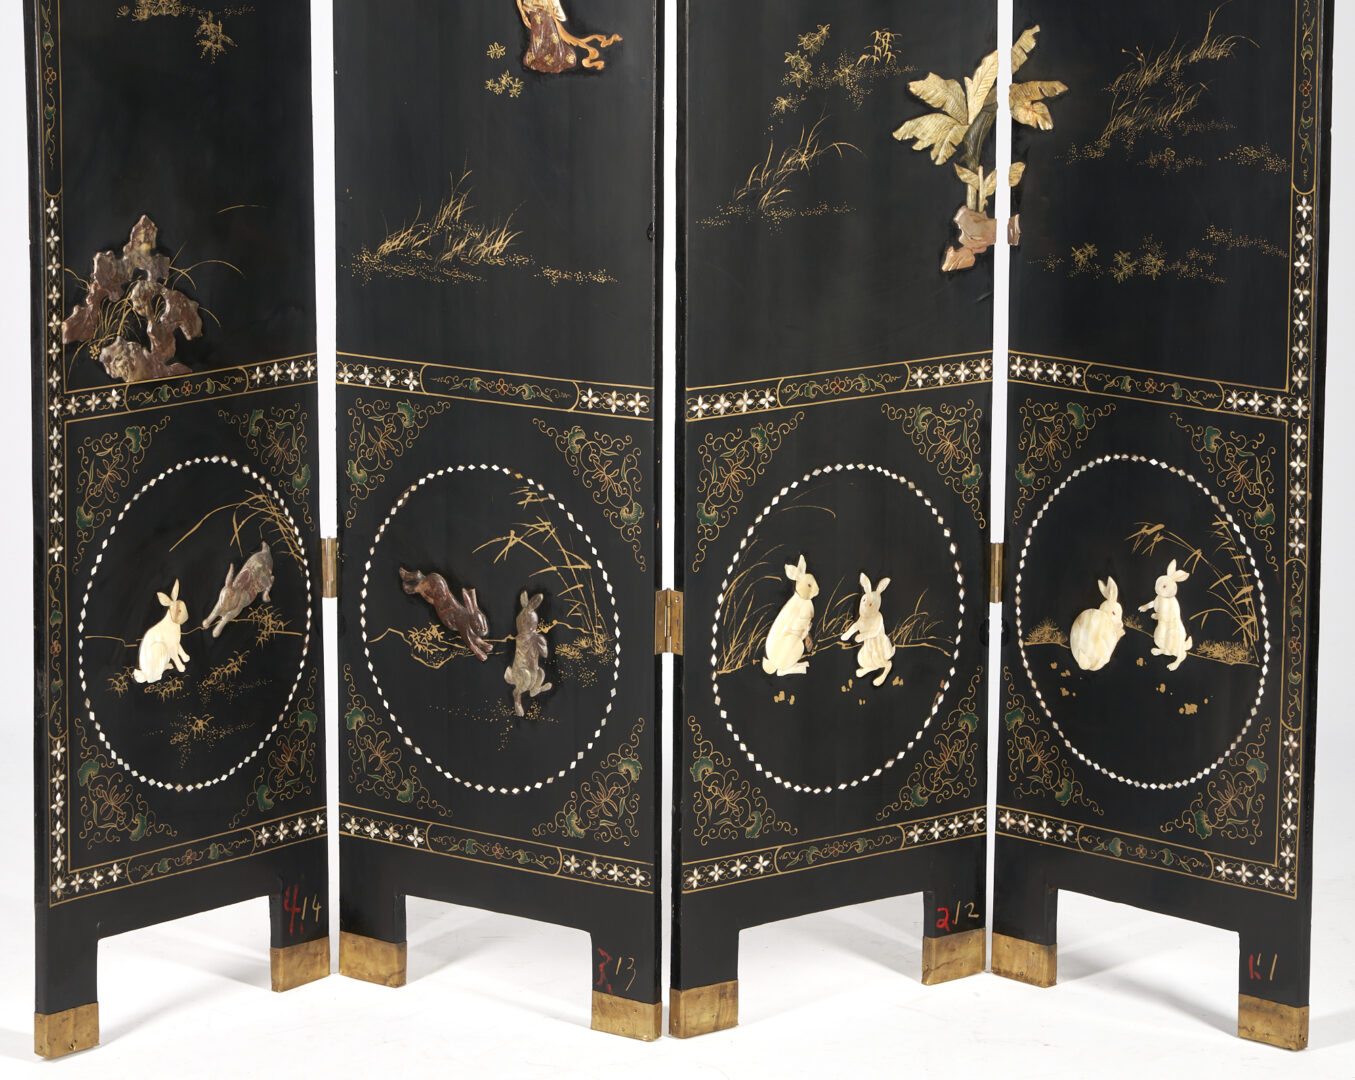 Lot 242: Chinese 4-Panel Inlaid & Hardstone Lacquer Screen